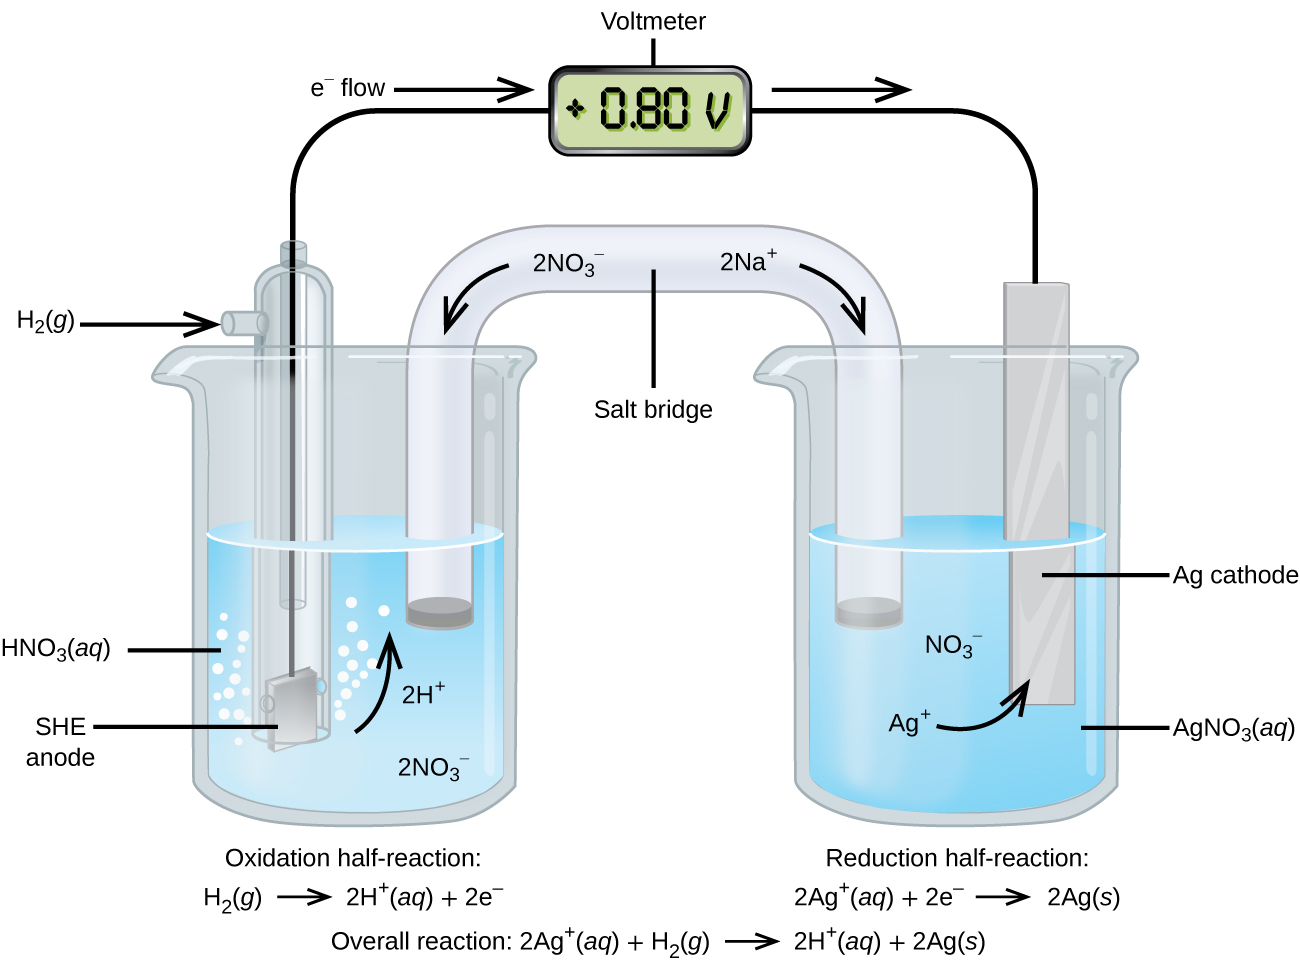 This figure contains a diagram of an electrochemical cell. Two beakers are shown. Each is just over half full. The beaker on the left contains a clear, colorless solution which is labeled “H N O subscript 3 ( a q ).” The beaker on the right contains a clear, colorless solution which is labeled “A g N O subscript 3 ( a q ).” A glass tube in the shape of an inverted U connects the two beakers at the center of the diagram and is labeled “Salt bridge.” The tube contents are colorless. The ends of the tubes are beneath the surface of the solutions in the beakers and a small grey plug is present at each end of the tube. The label “2 N a superscript plus” appears on the upper right portion of the tube. A curved arrow extends from this label down and to the right. The label “2 N O subscript 3 superscript negative” appears on the upper left portion of the tube. A curved arrow extends from this label down and to the left. The beaker on the left has a glass tube partially submerged in the liquid. Bubbles are rising from the grey square, labeled “SHE anode” at the bottom of the tube. A curved arrow points up to the right. The labels “2 H superscript plus” and “2 N O subscript 3 superscript negative” appear on the liquid in the beaker. A black wire extends from the grey square up the interior of the tube through a small port at the top to a rectangle with a digital readout of “positive 0.80 V” which is labeled “Voltmeter.” A second small port extends out the top of the tube to the left. An arrow points to the port opening from the left. The base of this arrow is labeled “H subscript 2 ( g ).” The beaker on the right has a silver strip that is labeled “A g cathode.” A wire extends from the top of this strip to the voltmeter. An arrow points toward the voltmeter from the left which is labeled “e superscript negative flow.” Similarly, an arrow points away from the voltmeter to the right. The solution in the beaker on the right has the labels “N O subscript 3 superscript negative” and “A g superscript plus” on the solution. A curved arrow extends from the A g superscript plus label to the A g cathode. Below the left beaker at the bottom of the diagram is the label “Oxidation half-reaction: H subscript 2 ( g ) right pointing arrow 2 H superscript plus ( a q ) plus 2 e superscript negative.” Below the right beaker at the bottom of the diagram is the label “Reduction half-reaction: 2 A g superscript plus ( a q ) right pointing arrow 2 A g ( s ).”